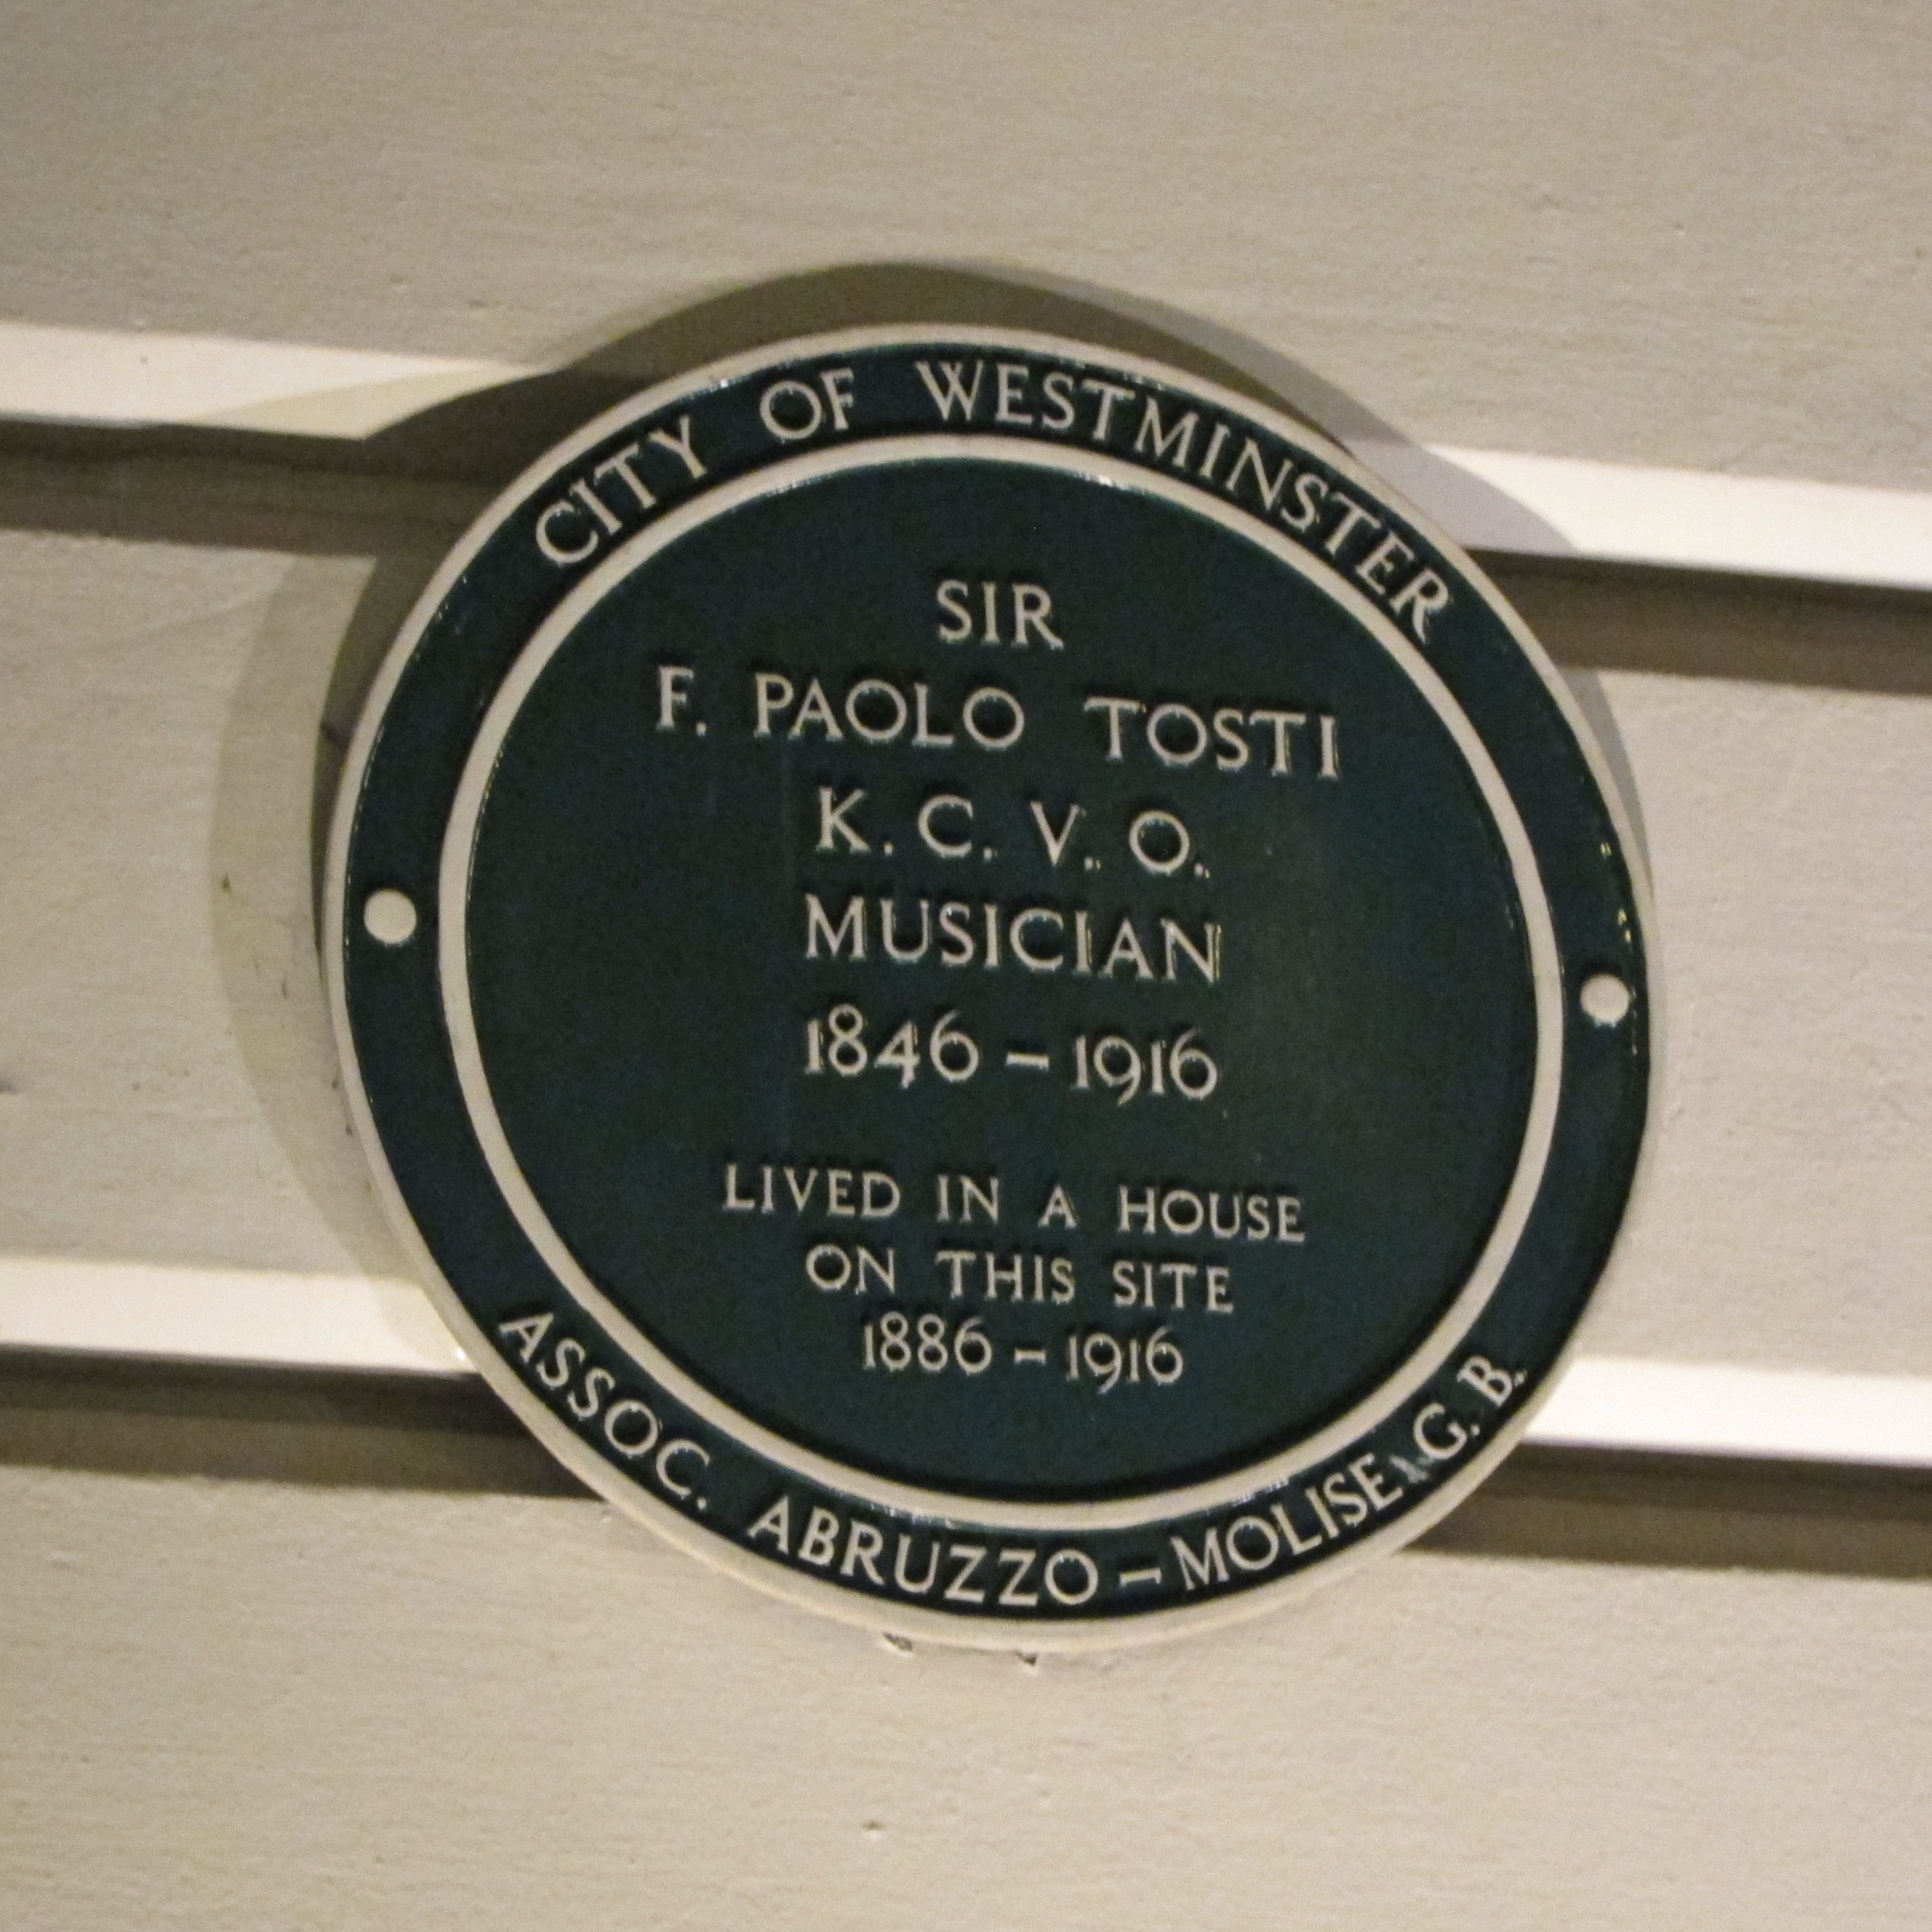 Paolo Tosti Plaque